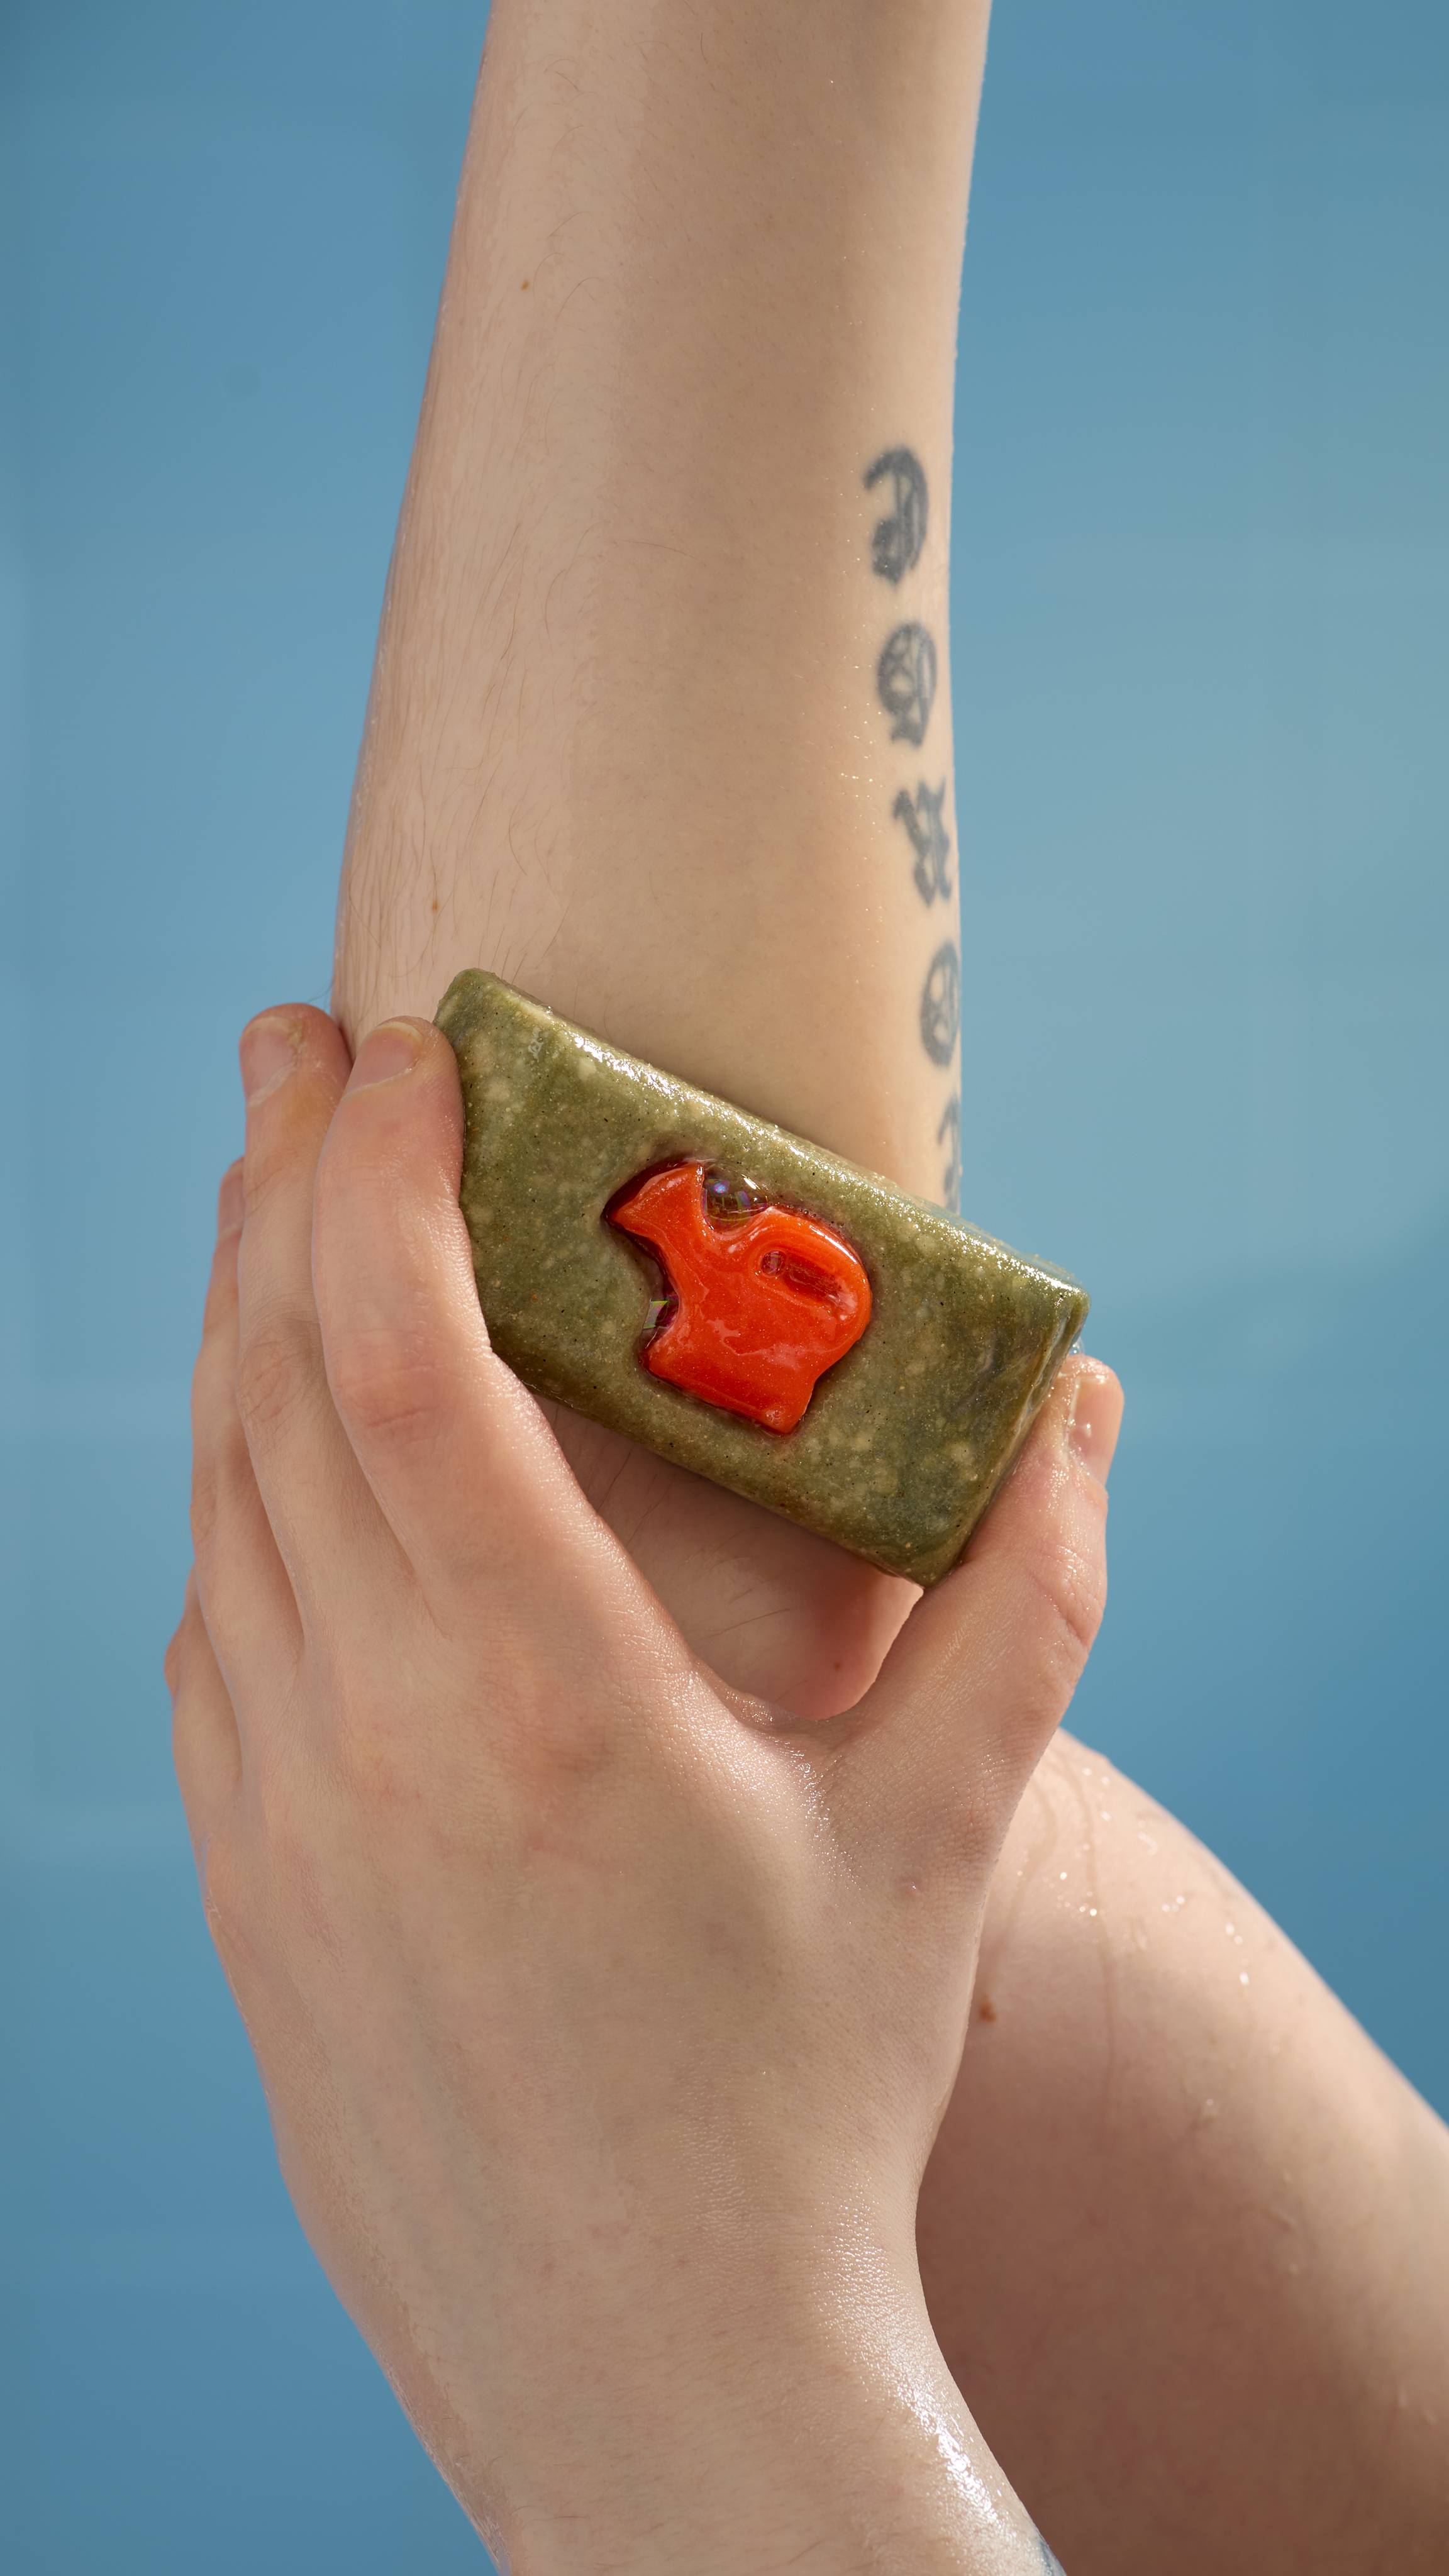 A close-up image of the model's forearm in the air are they lather up the True Grit soap over their elbow on a sky blue background. 